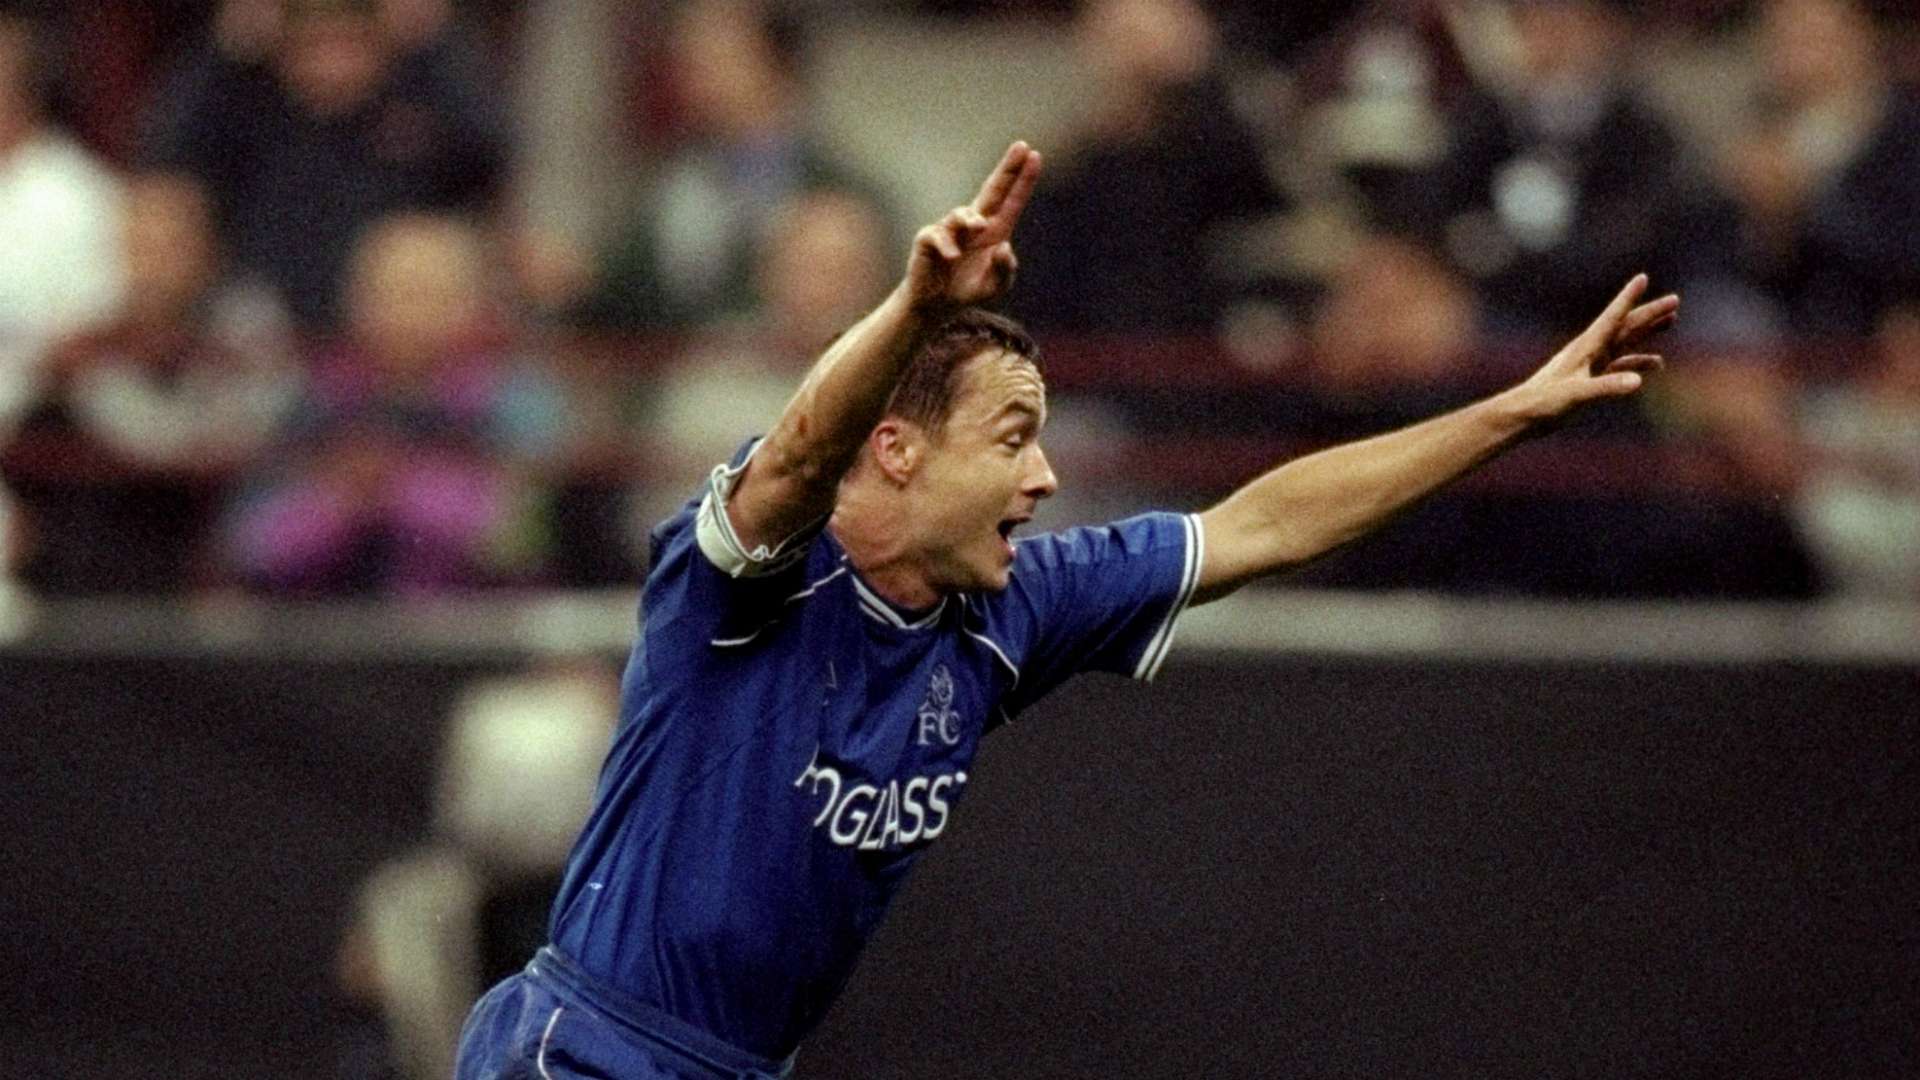 Chelsea's greatest Dennis Wise